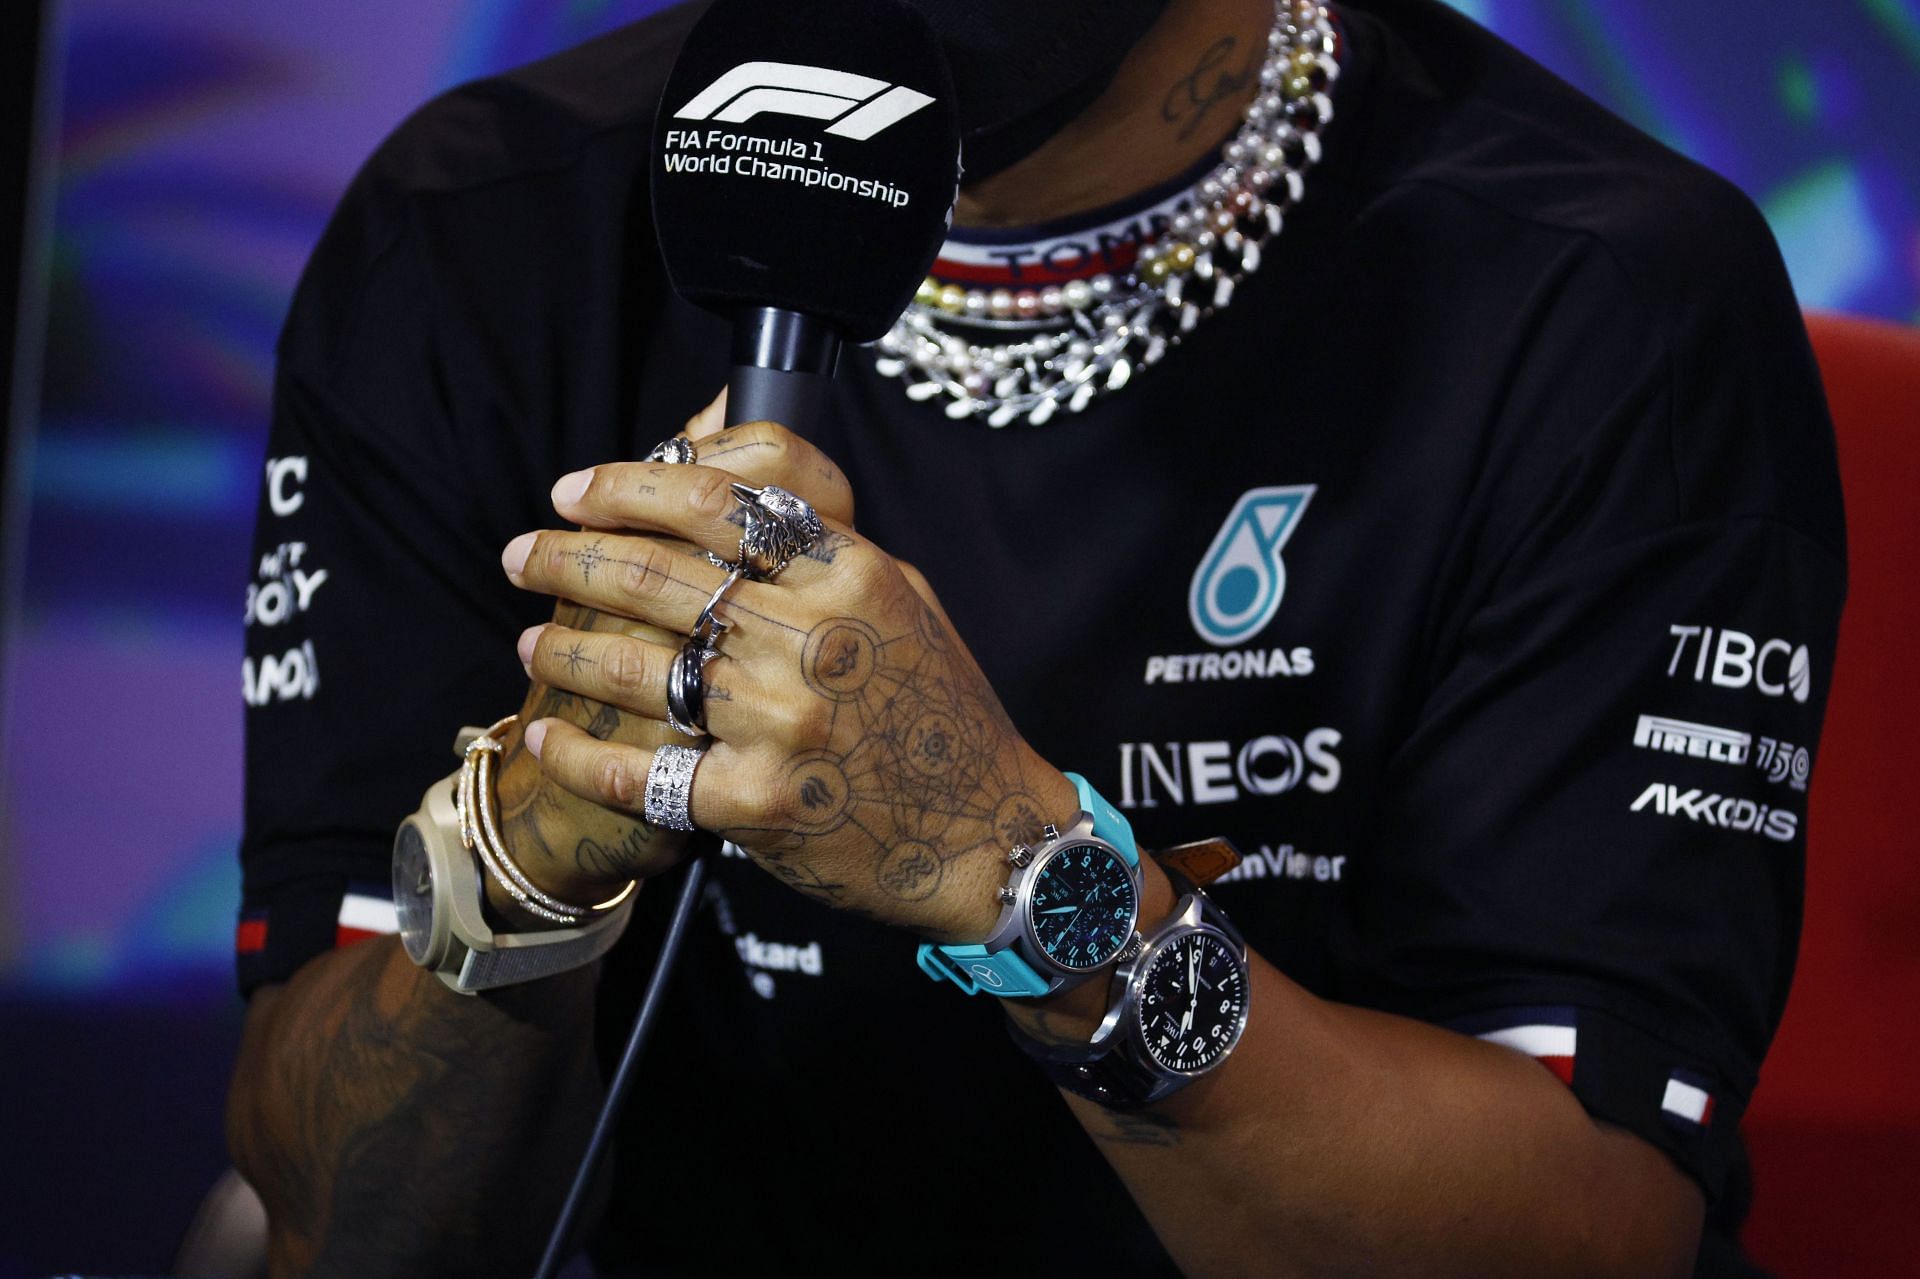 Lewis Hamilton and FIA have been caught in a rather uncomfortable impasse this season